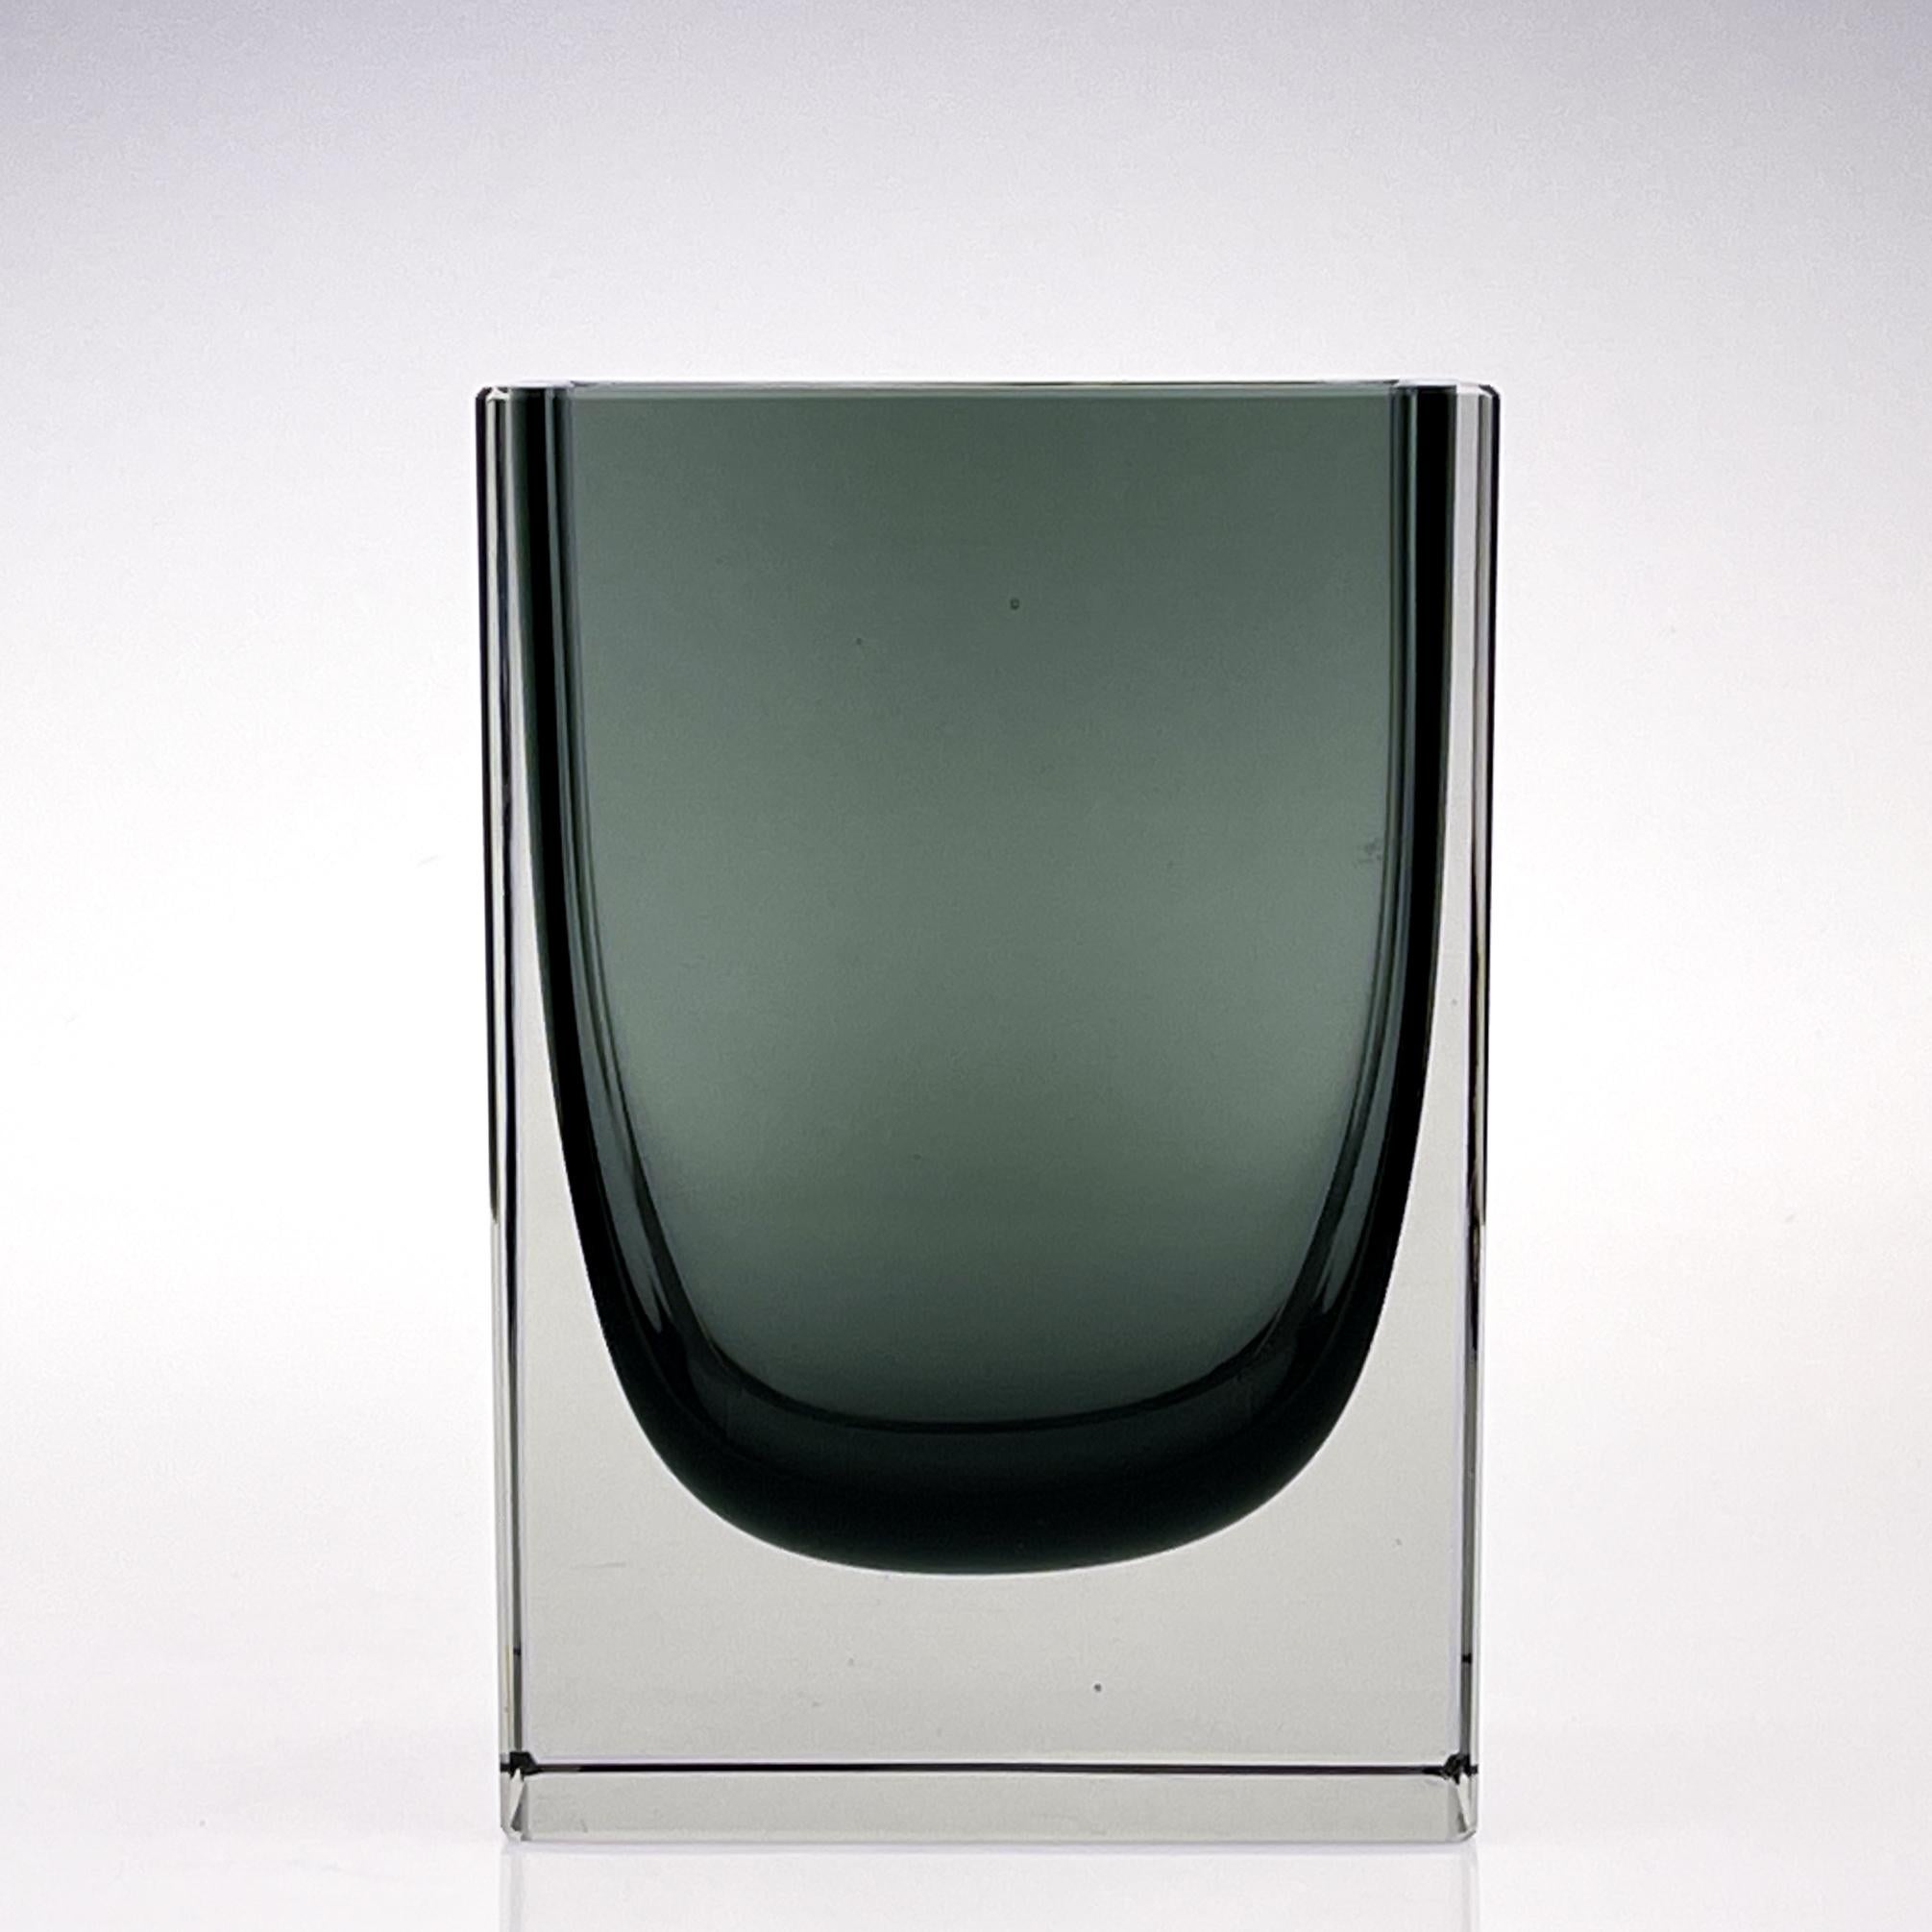 Mid Century Modern Kaj Franck Artglass Object KF262 green Handblown 1963

A fixed mould blown, cased, cut and posished art-object, model KF 262, in grey-green and clear glass. Designed by Kaj Franck in 1960 and executed by the Nuutajärvi-Notsjö